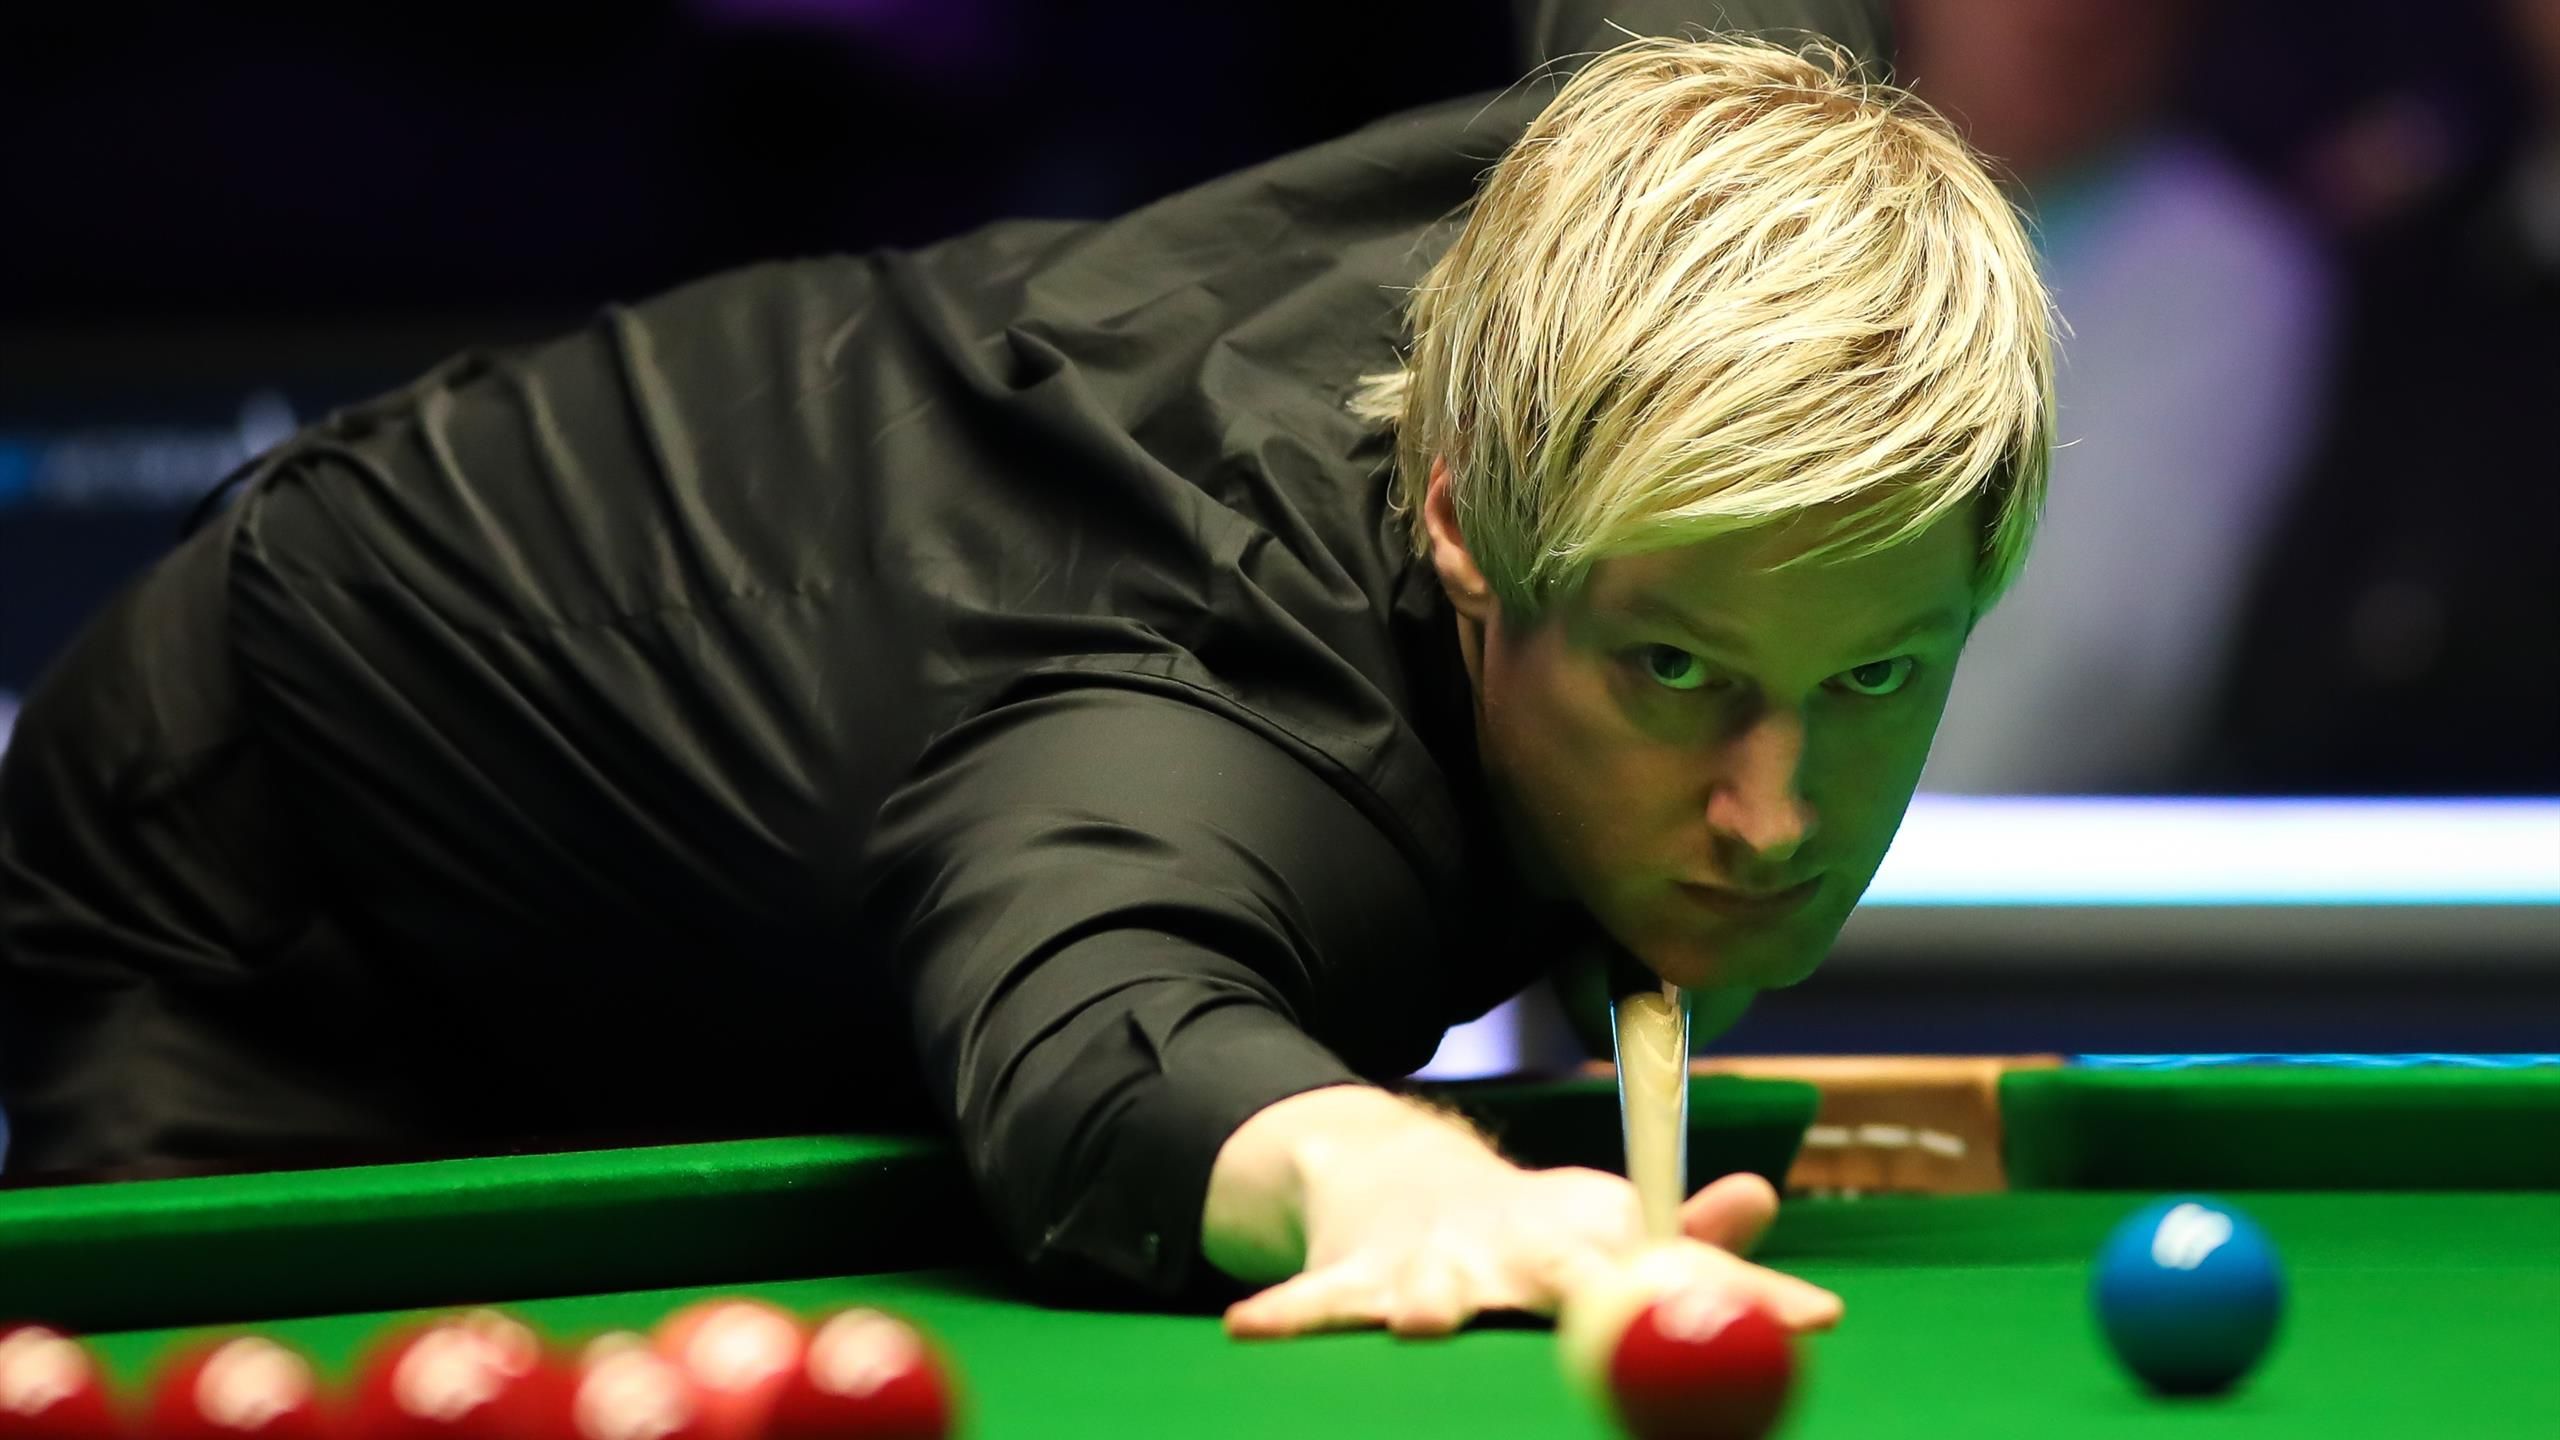 Championship League Neil Robertson withdraws from seasons first ranking event in Leicester as Ashley Carty advances